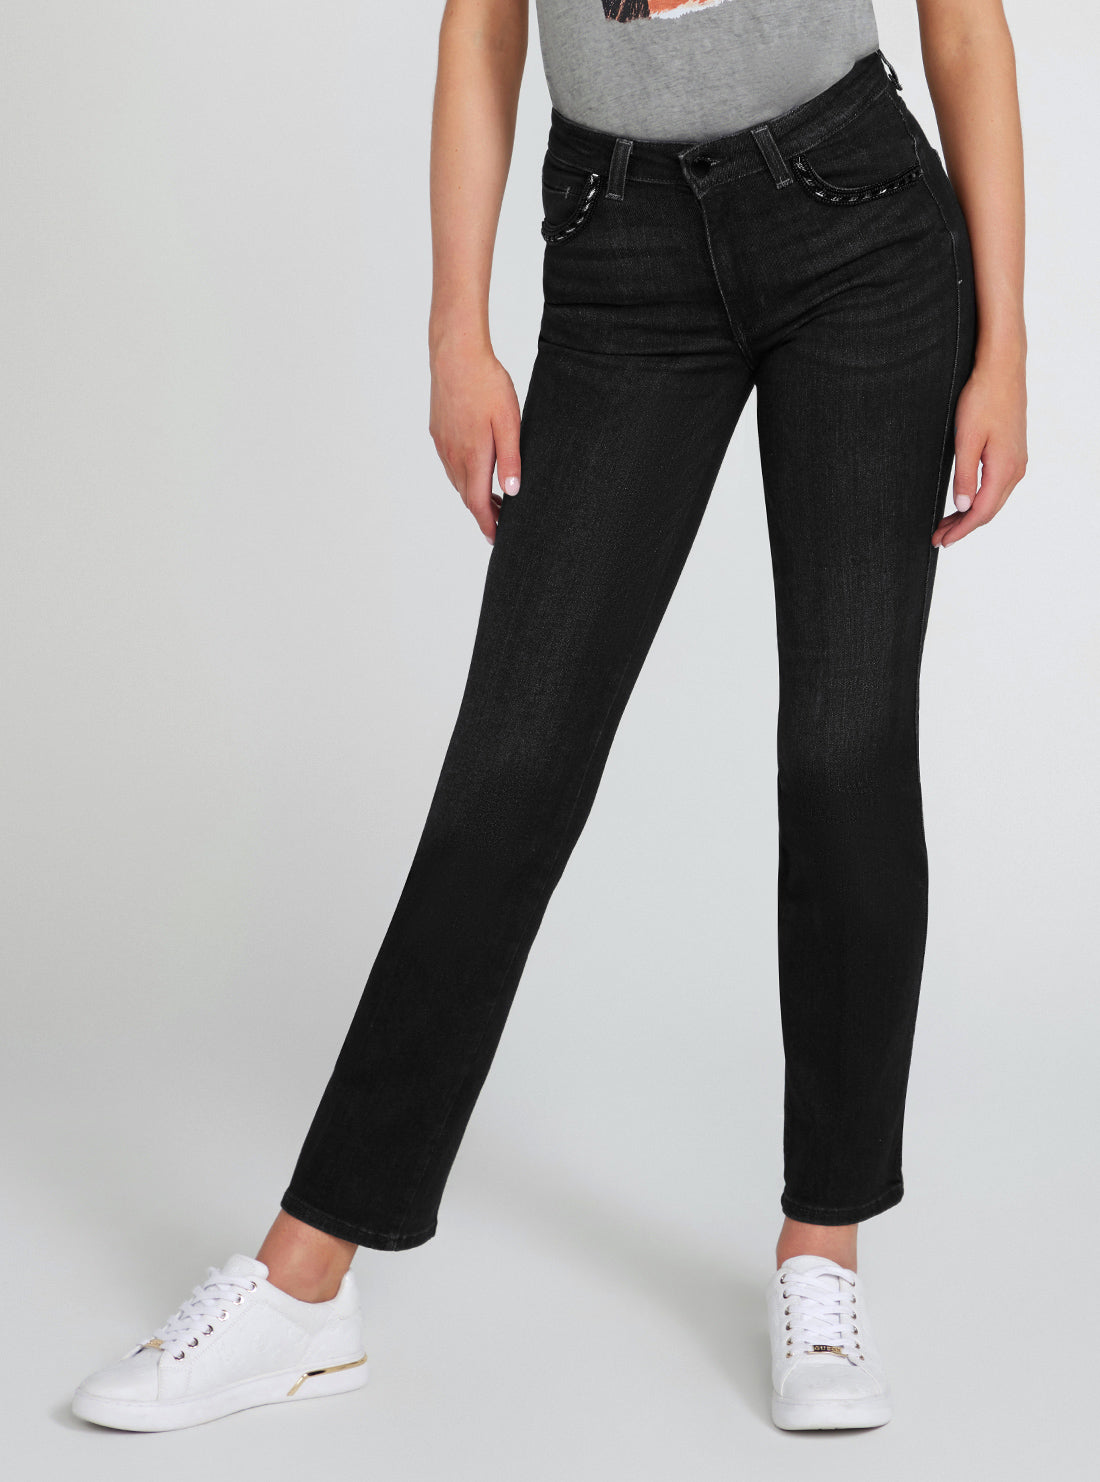 High-Rise Sexy Straight Leg Denim Jeans In Orbit Wash | GUESS Women's Apparel | front view